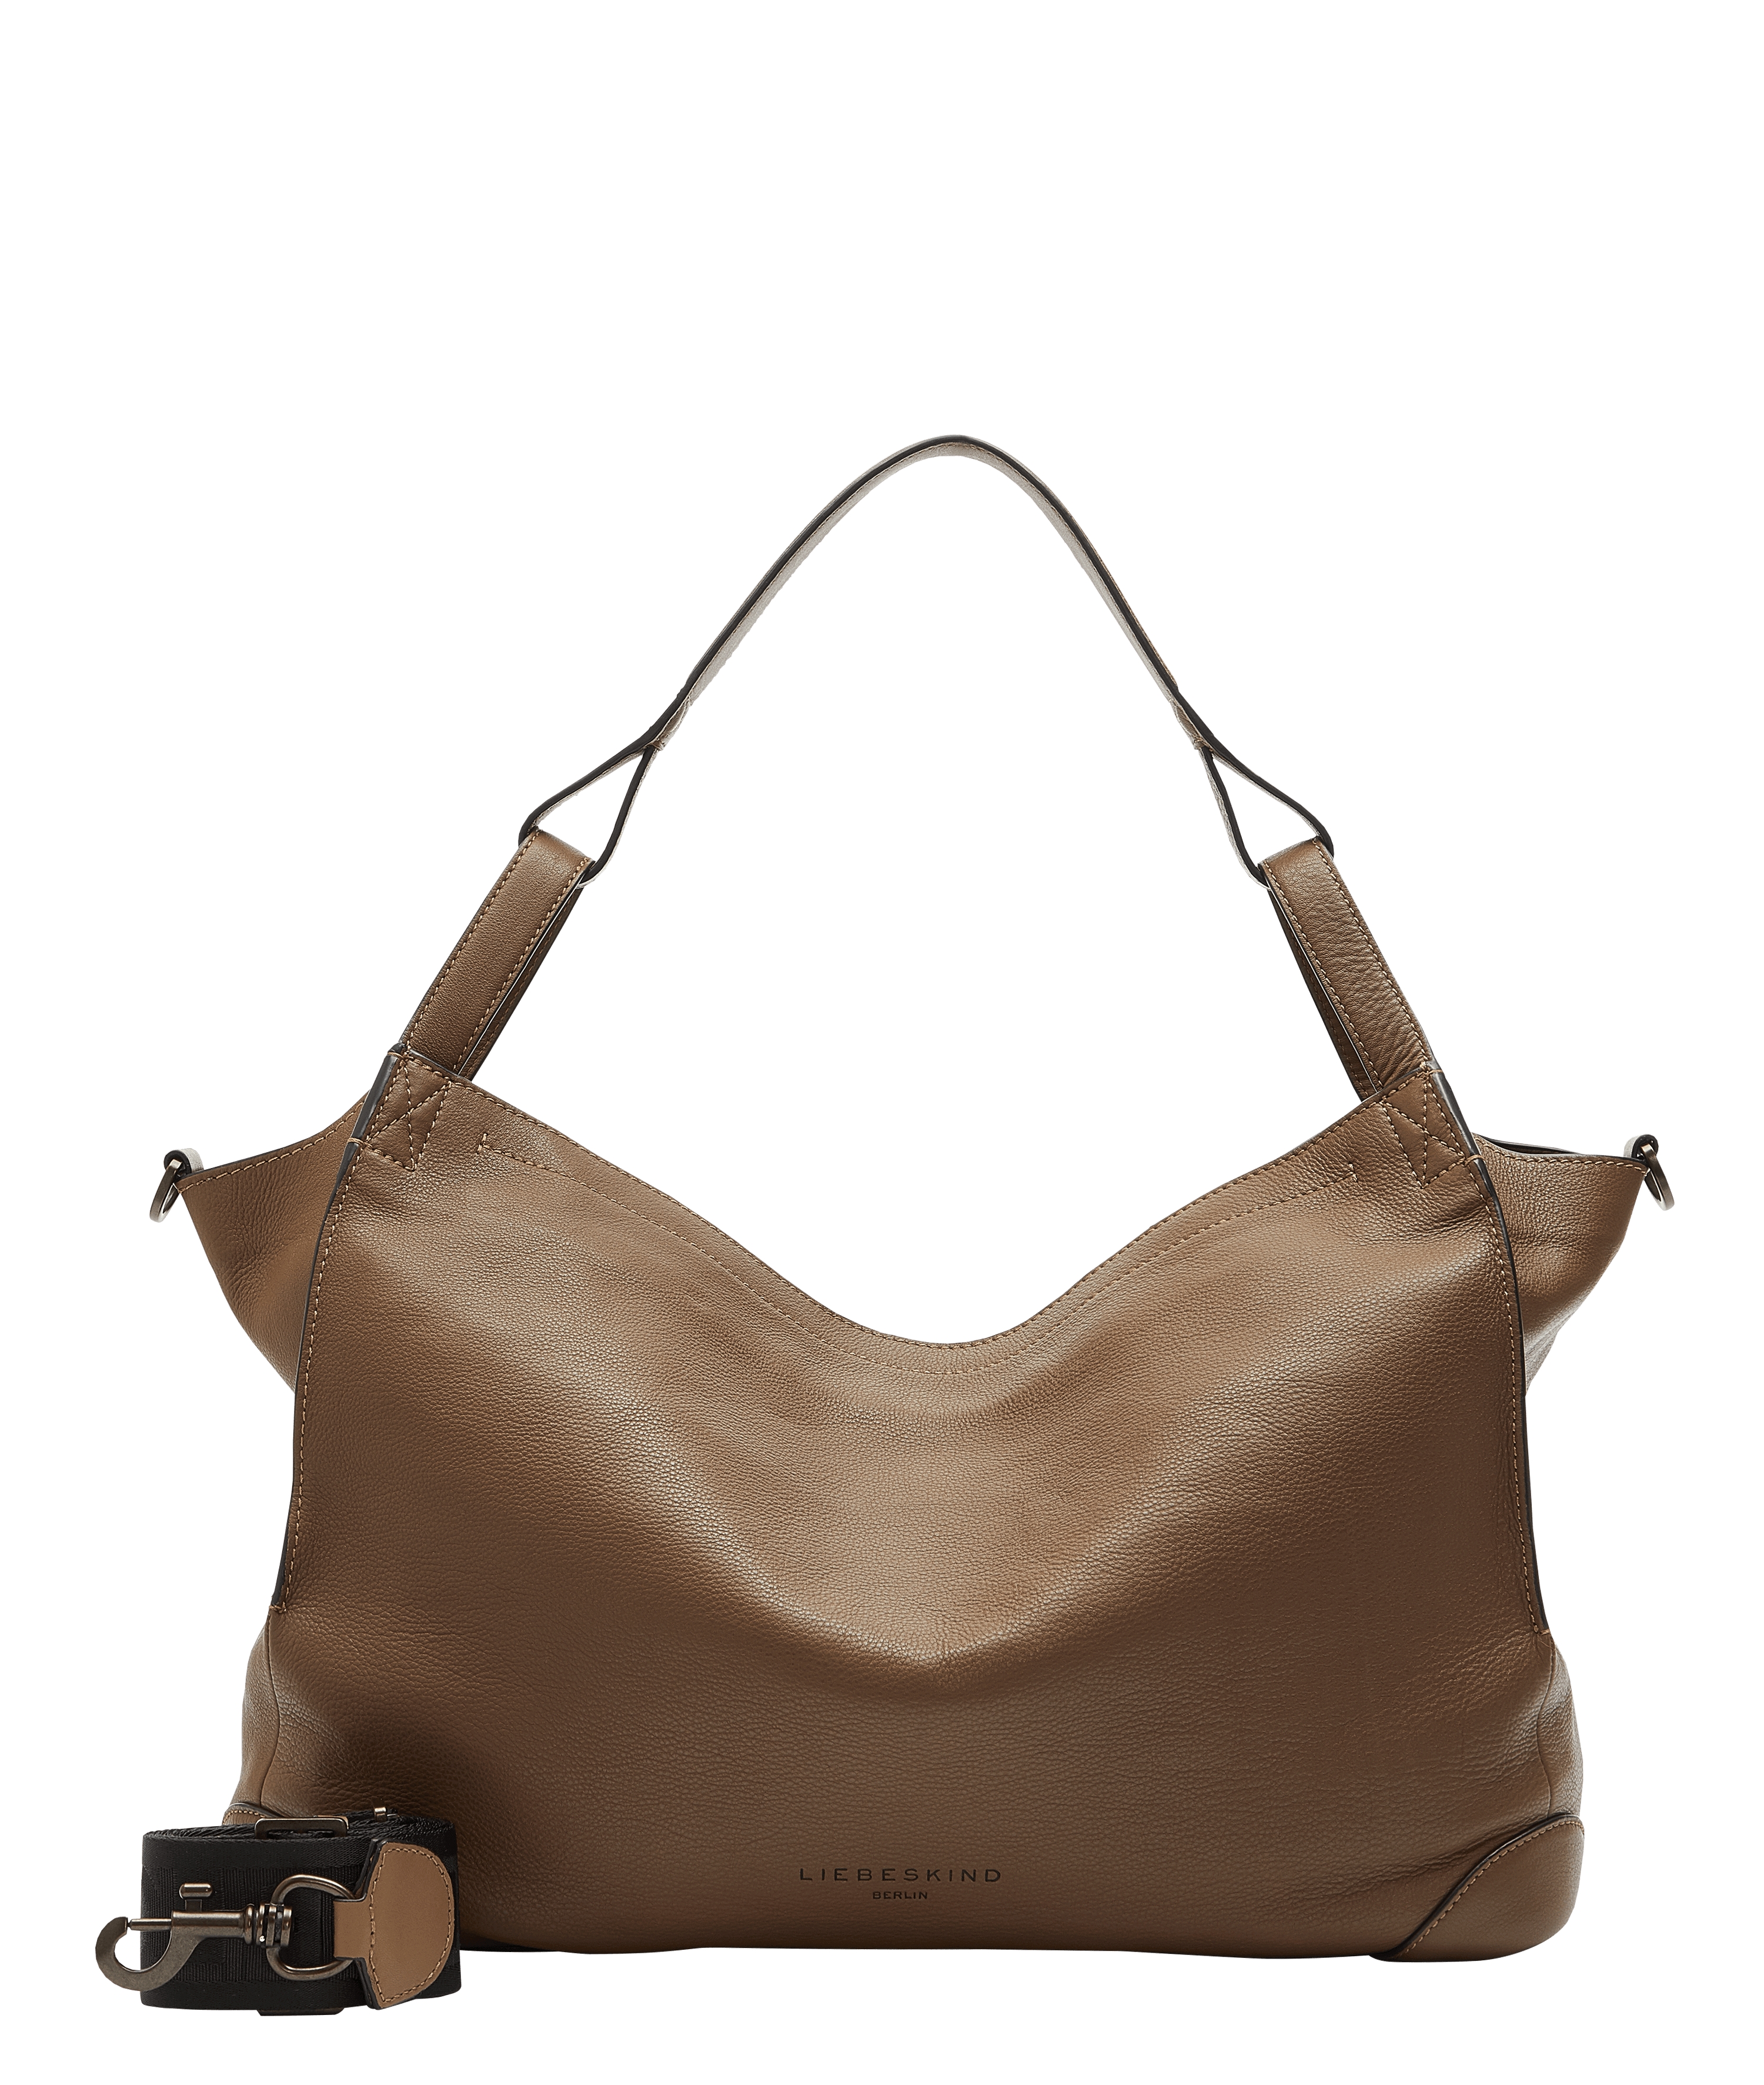 Liebeskind Audre Hobo XL